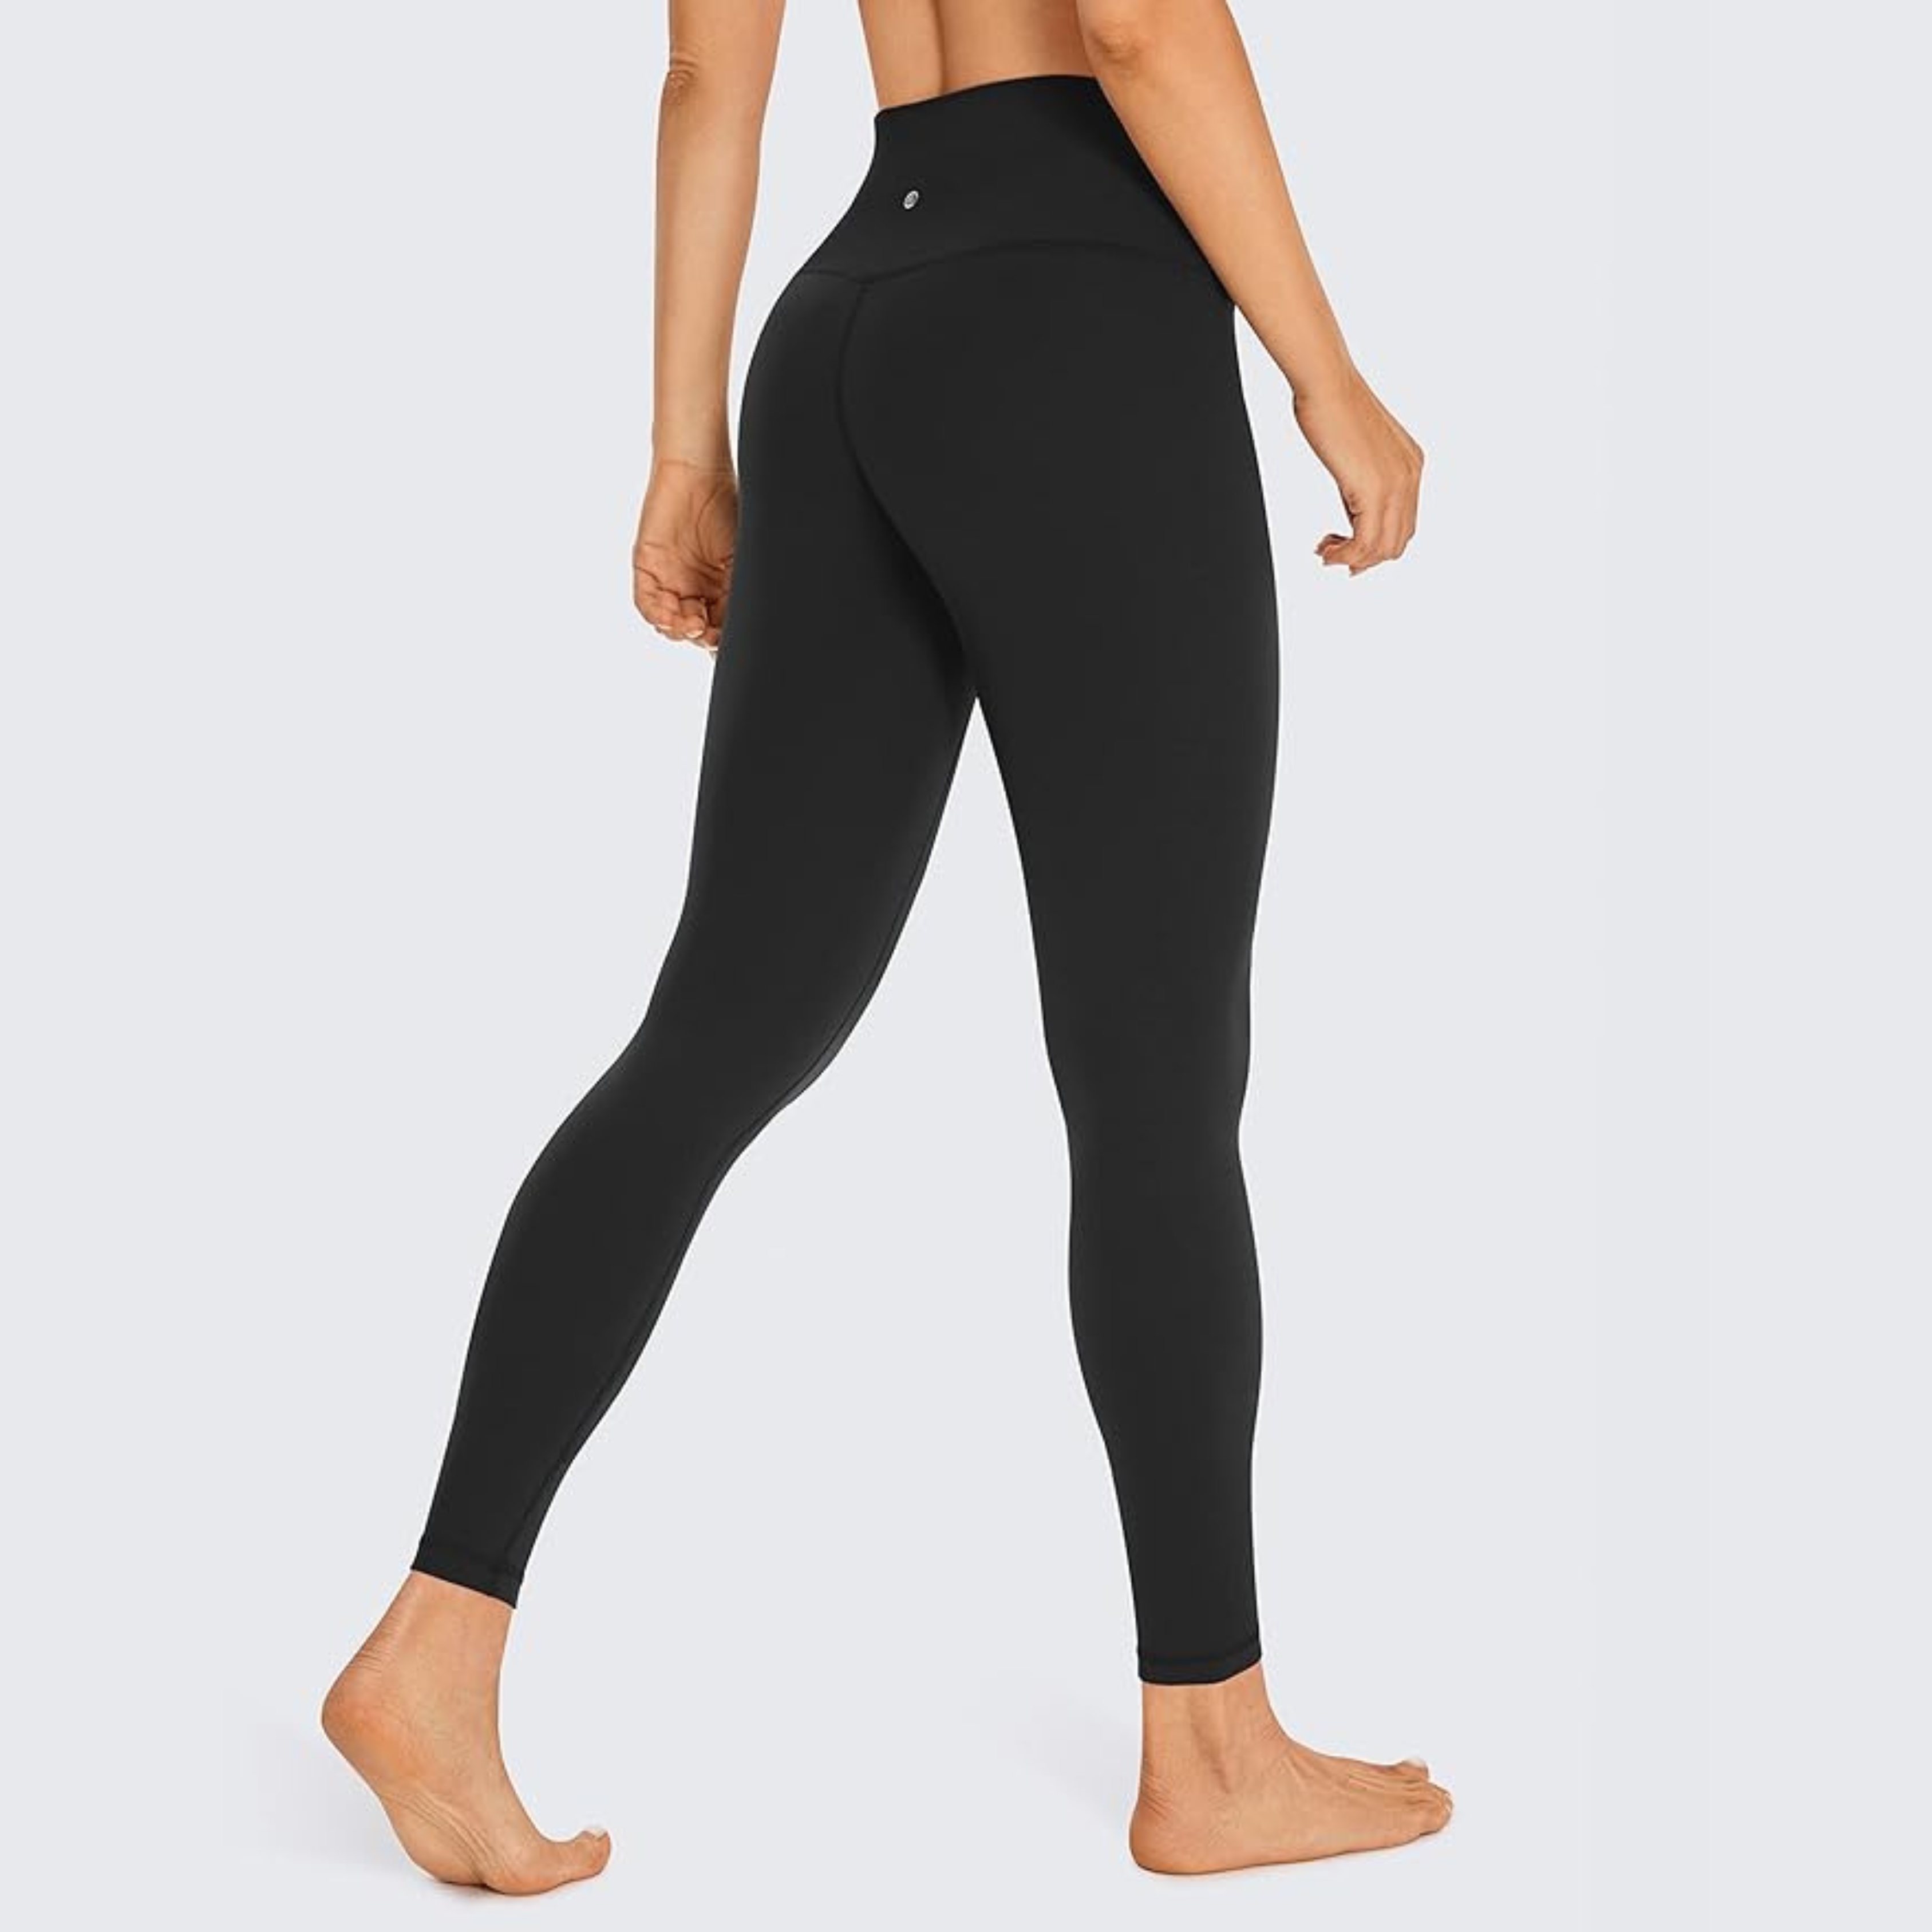 Twisted Southern Roots Boutique - Sang some of your favorite leggings…extra  15% till midnight w code: EXTRA15 Long black leggings, $16, two sizes: S/M,  M/XL Seriously the most comfortable leggings featuring an